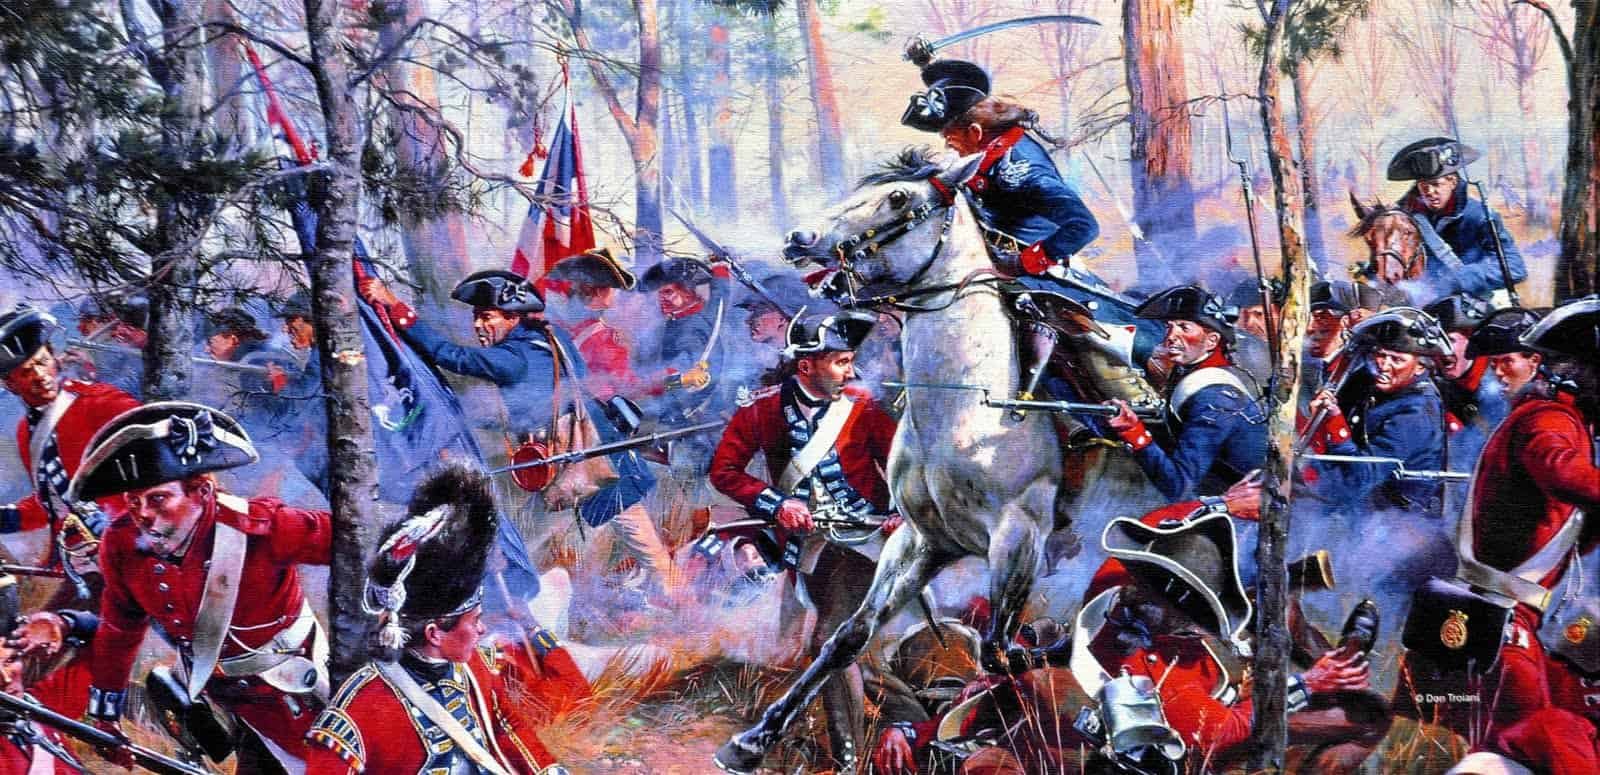 The Battle Of Cowpens January 17 1781 Near Cowpens South - 